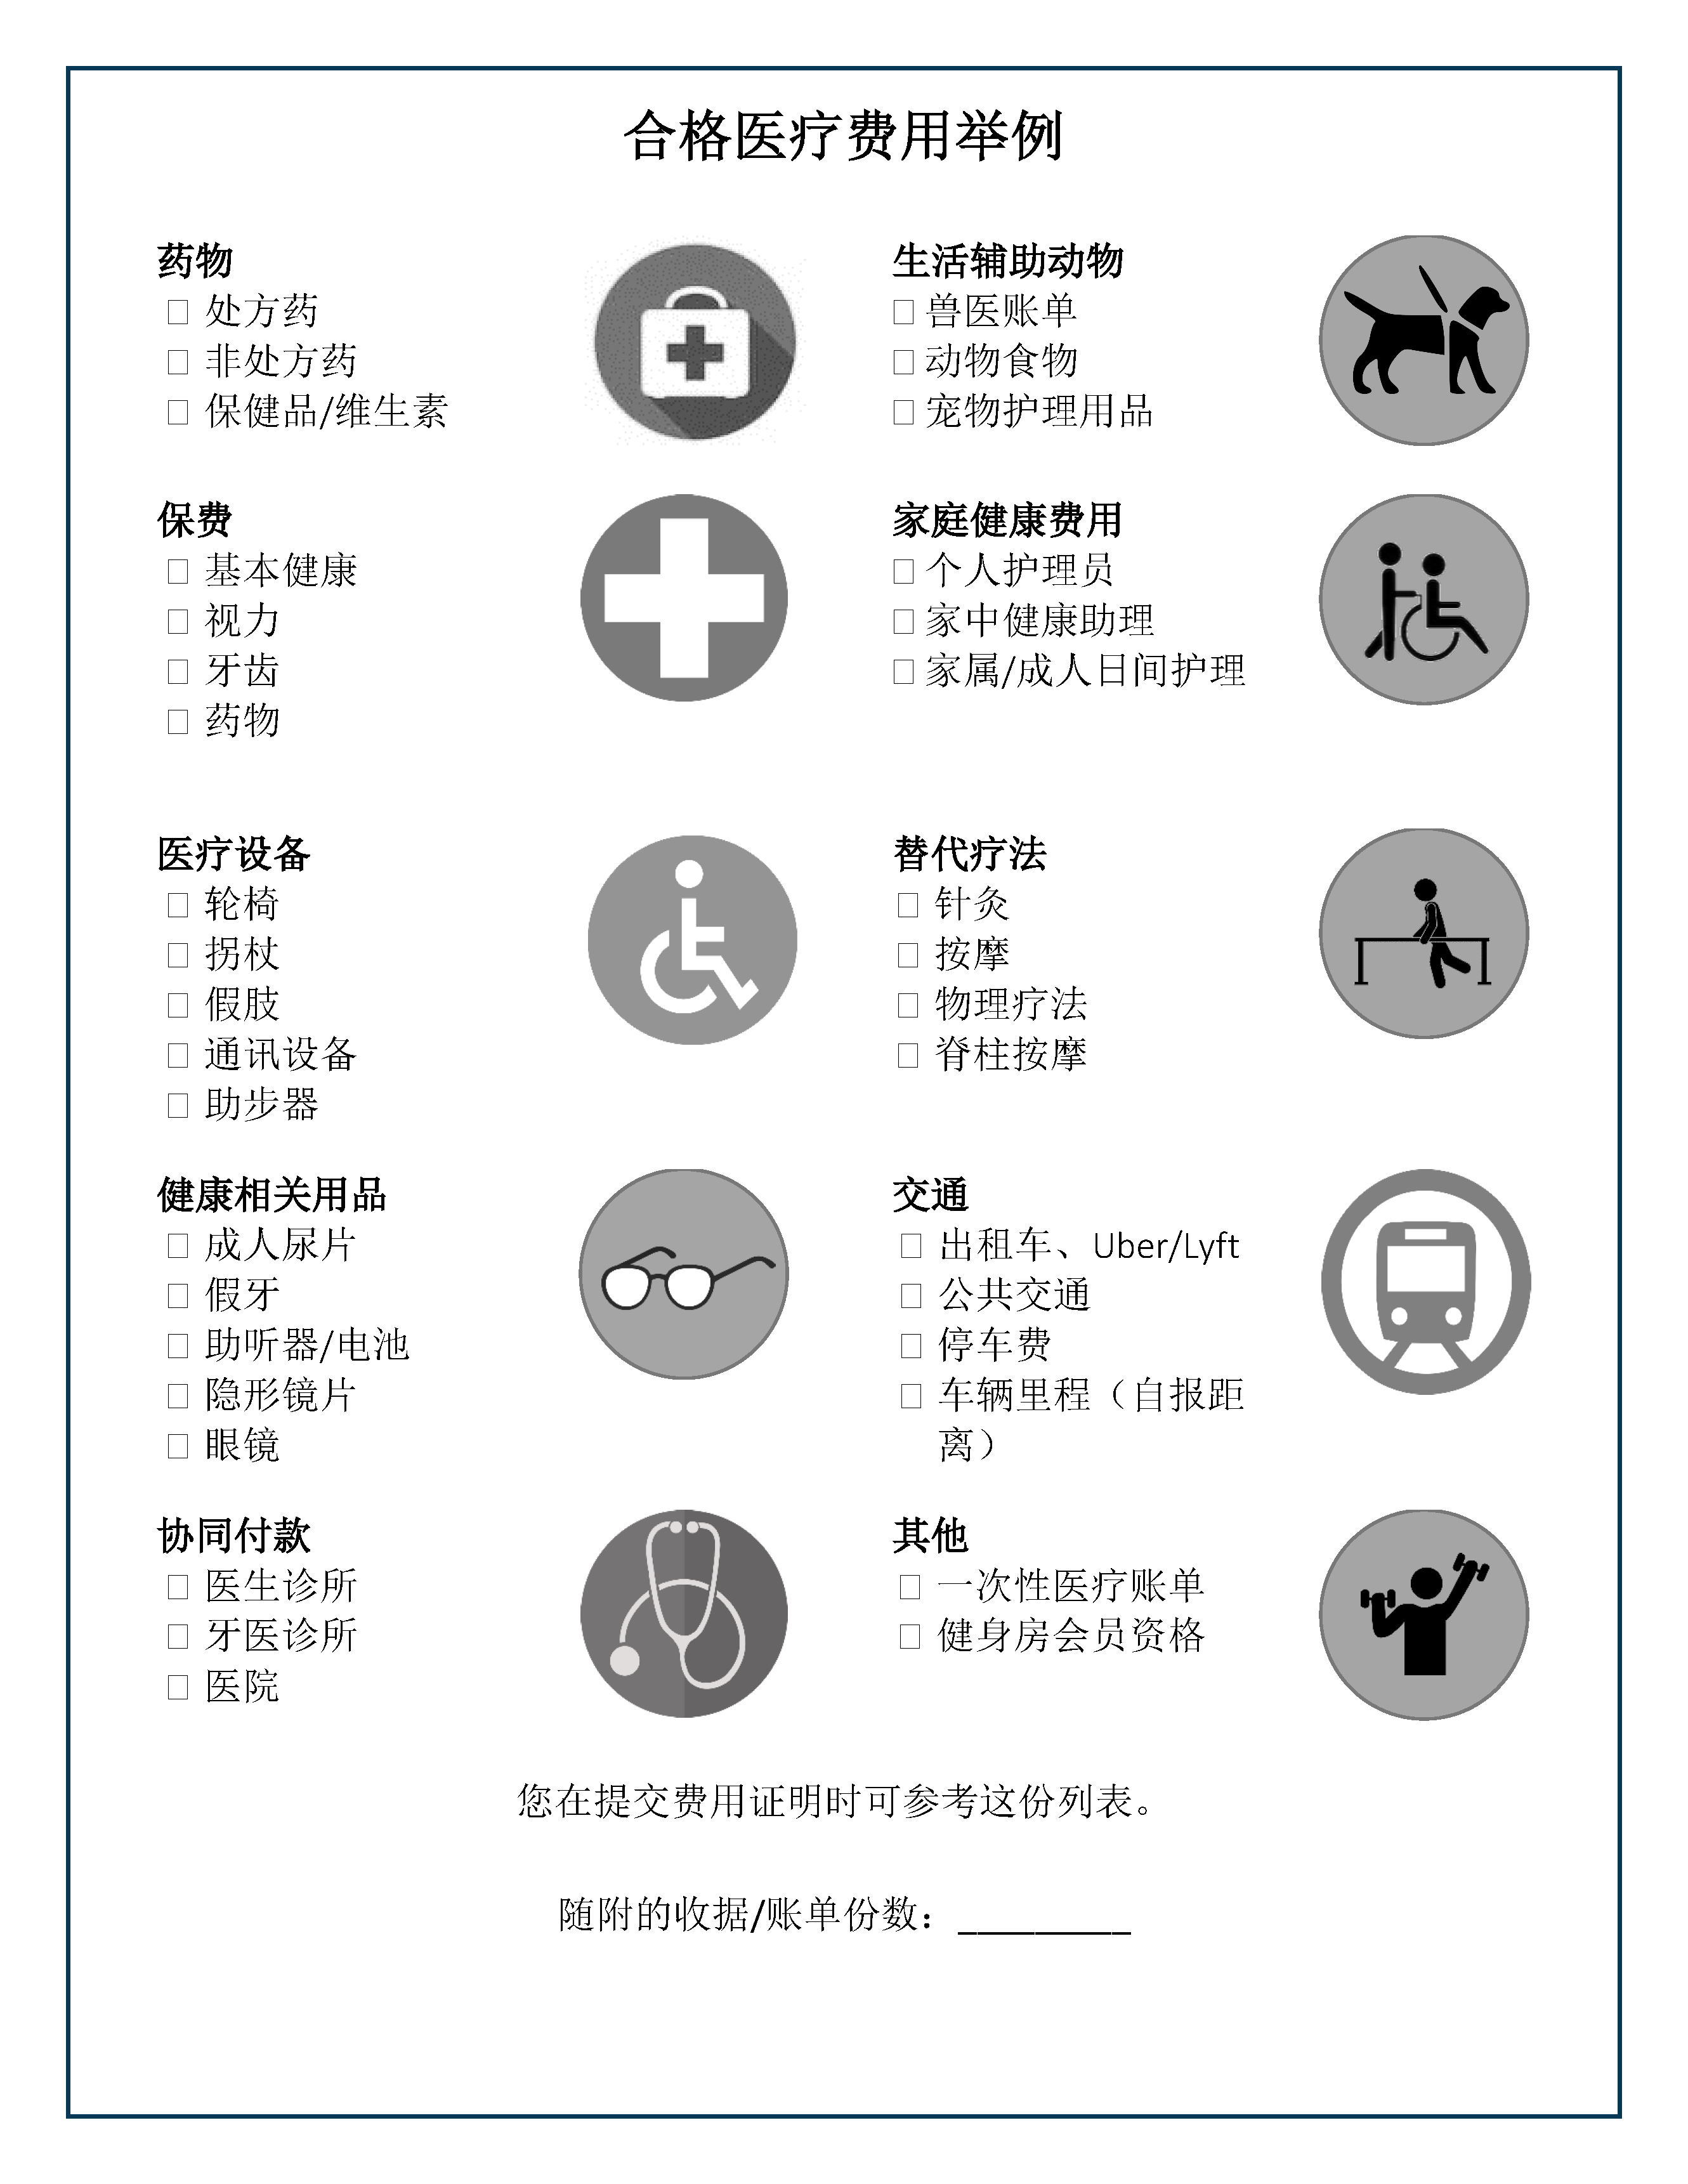 Chinese Medical Expense flyer